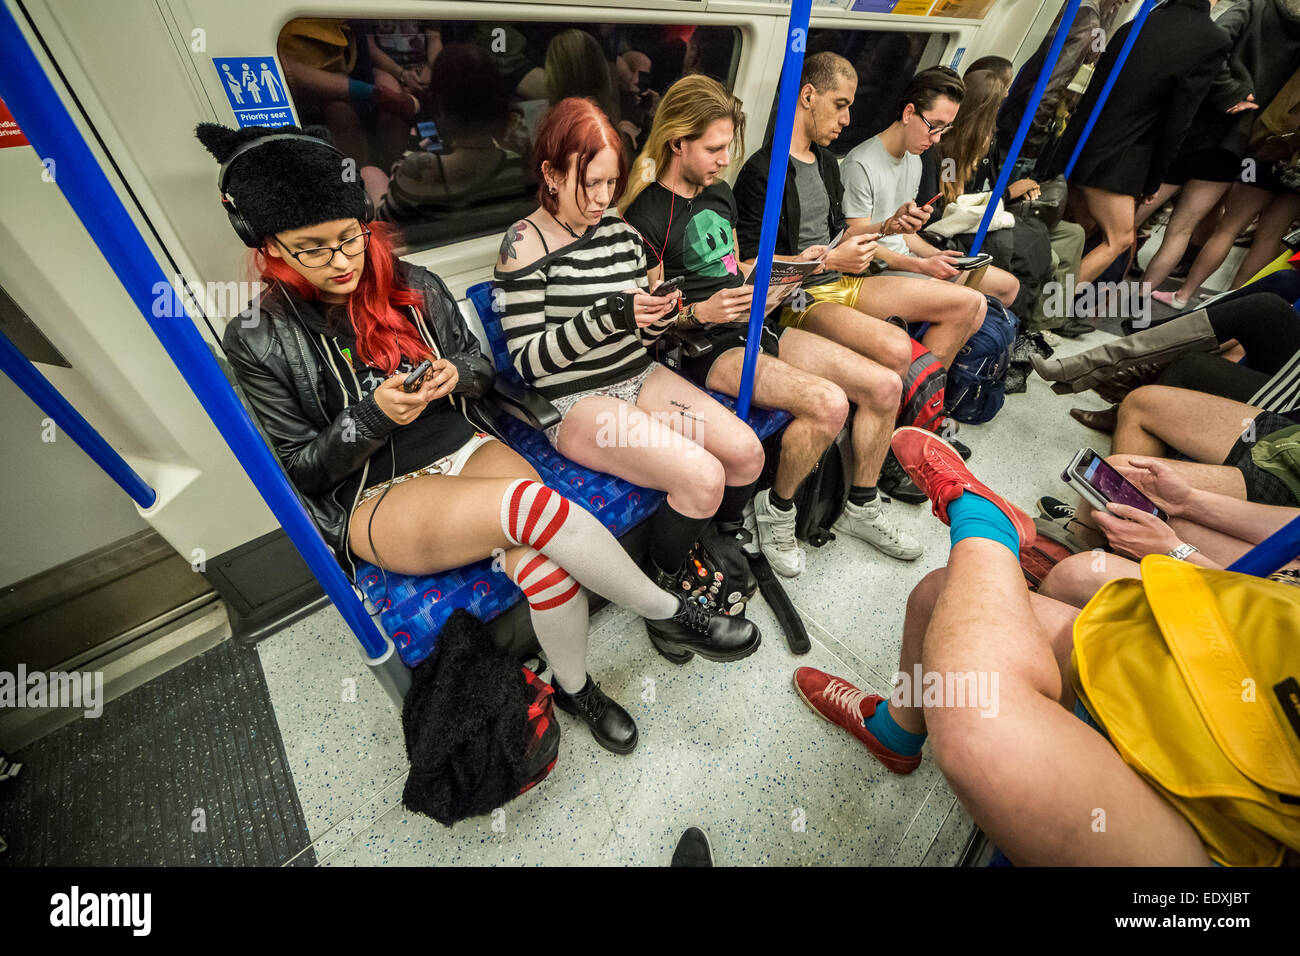 London commuters strip down to their pants for No Trousers Tube Ride   BelfastTelegraphcouk